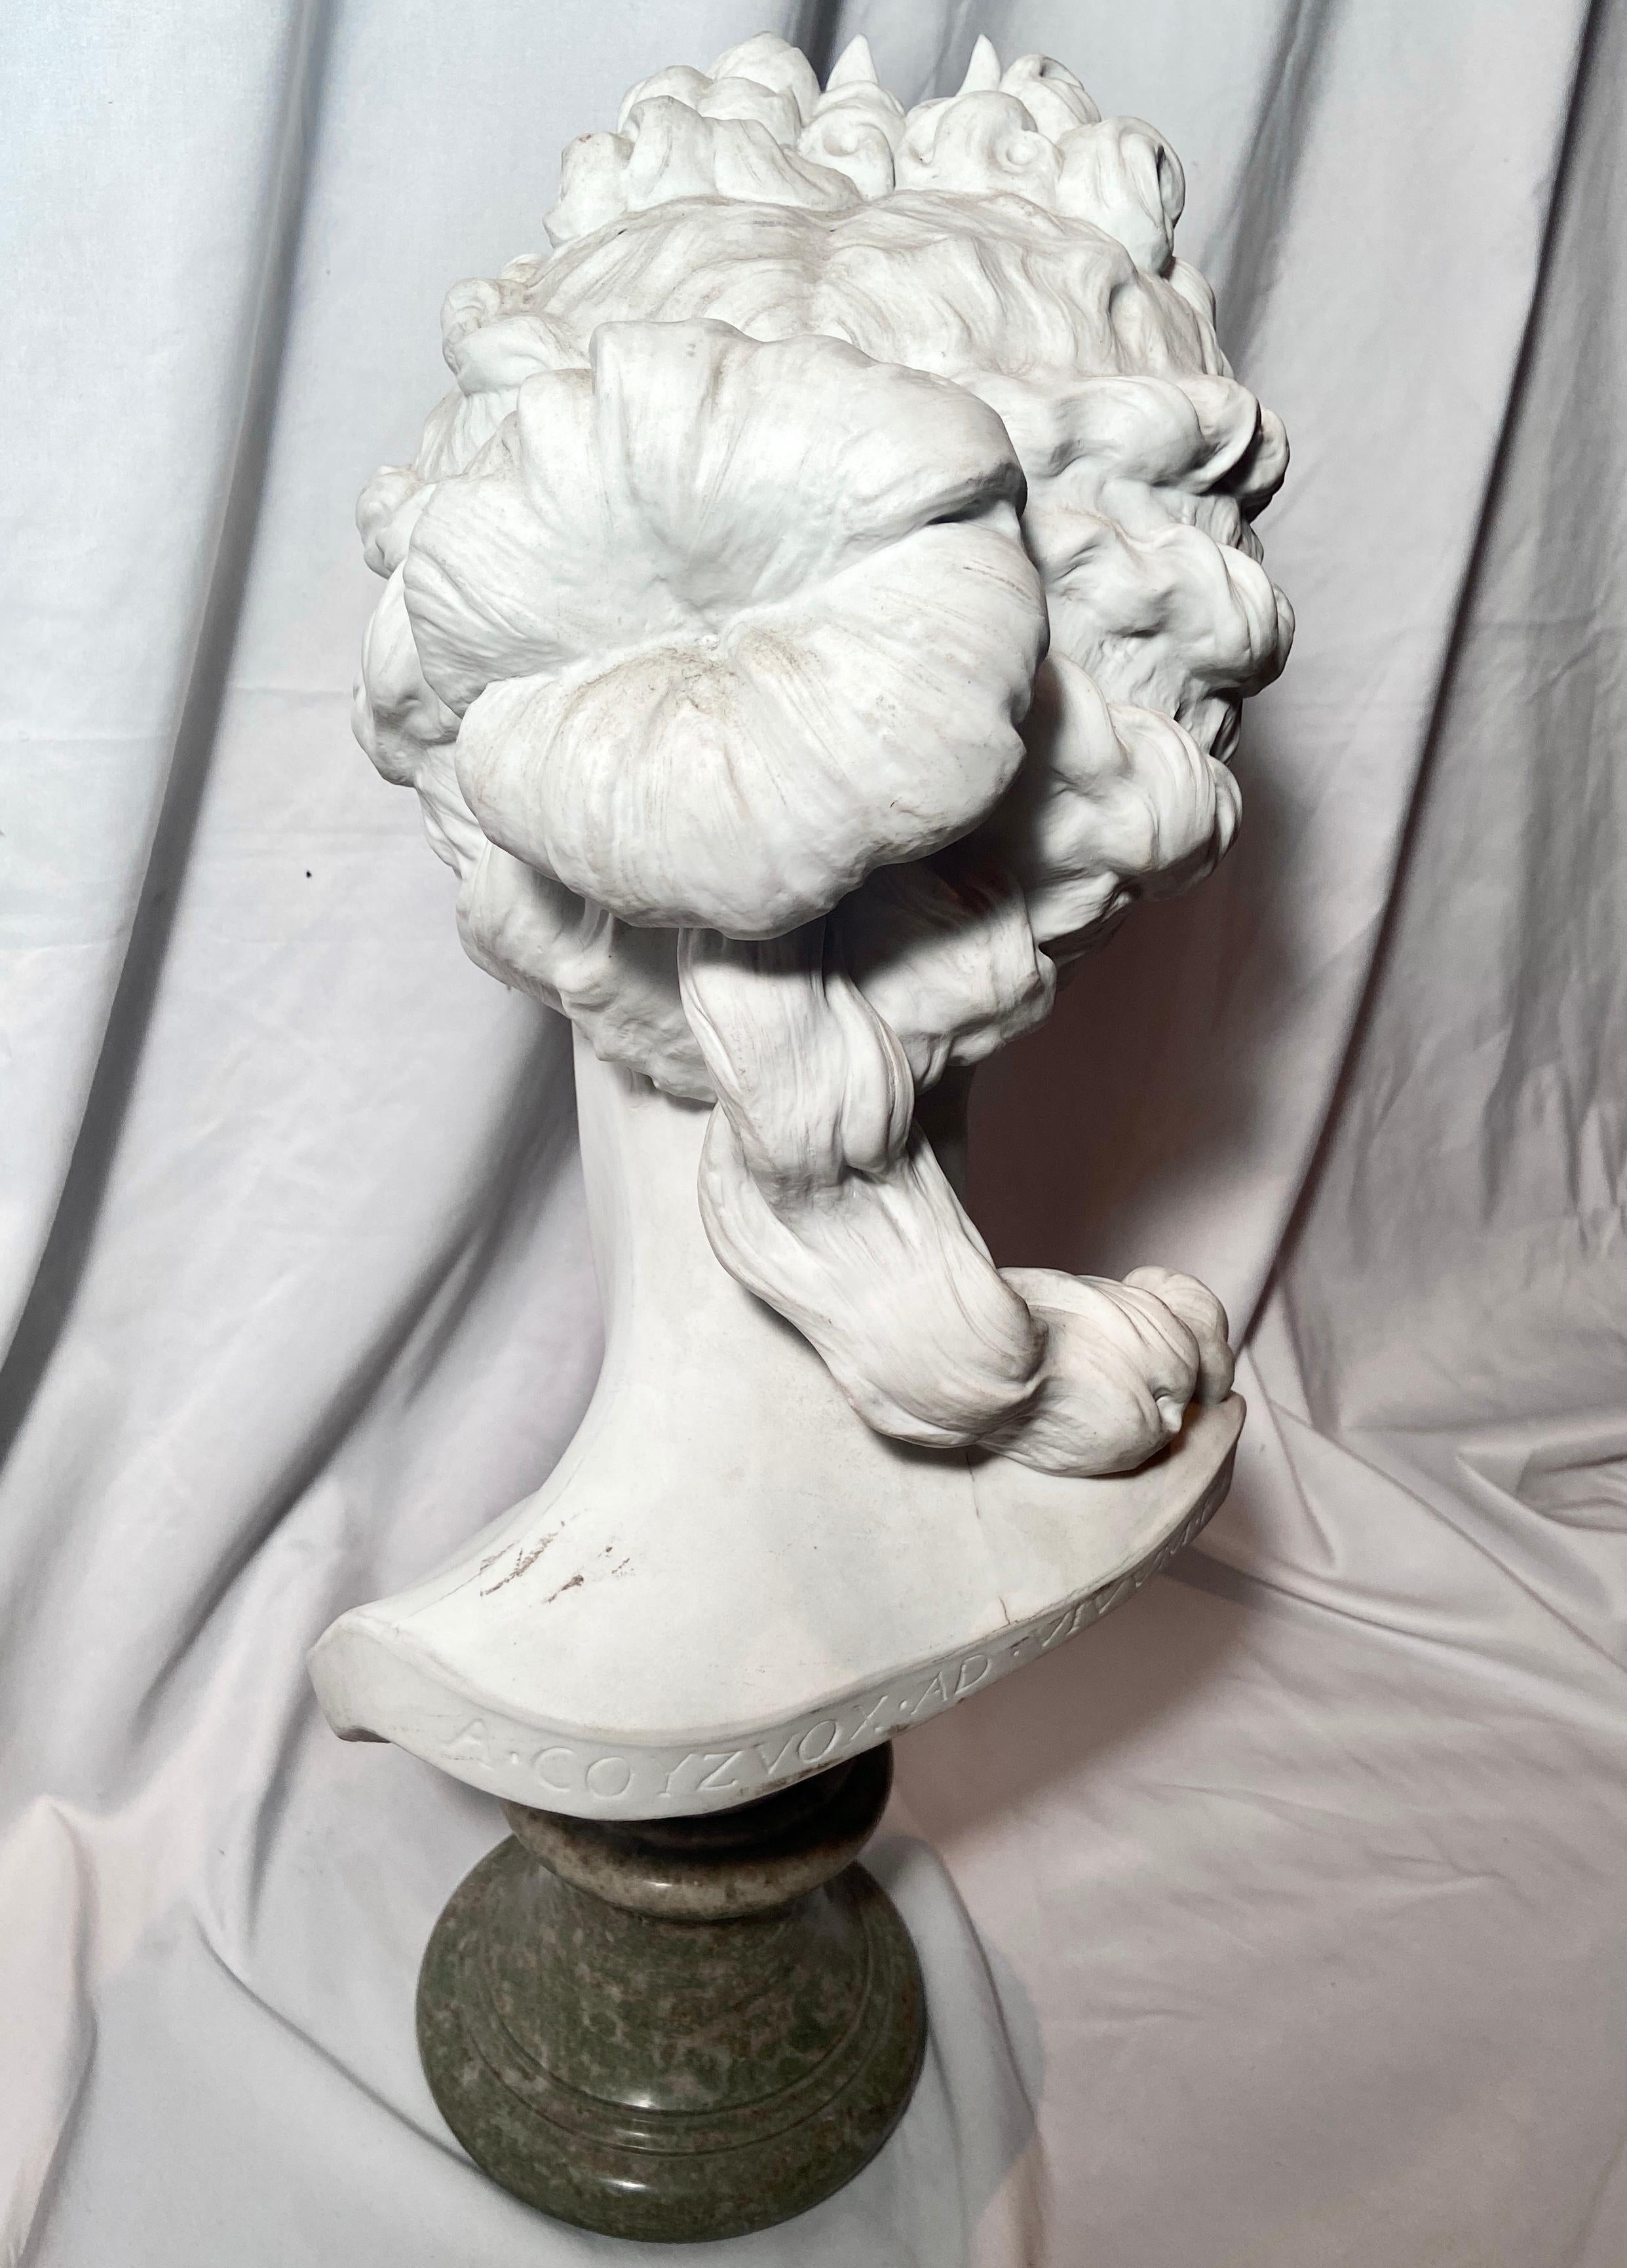 Antique 19th Century French Bisque Porcelain Bust of Diana, Goddess of the Hunt For Sale 1